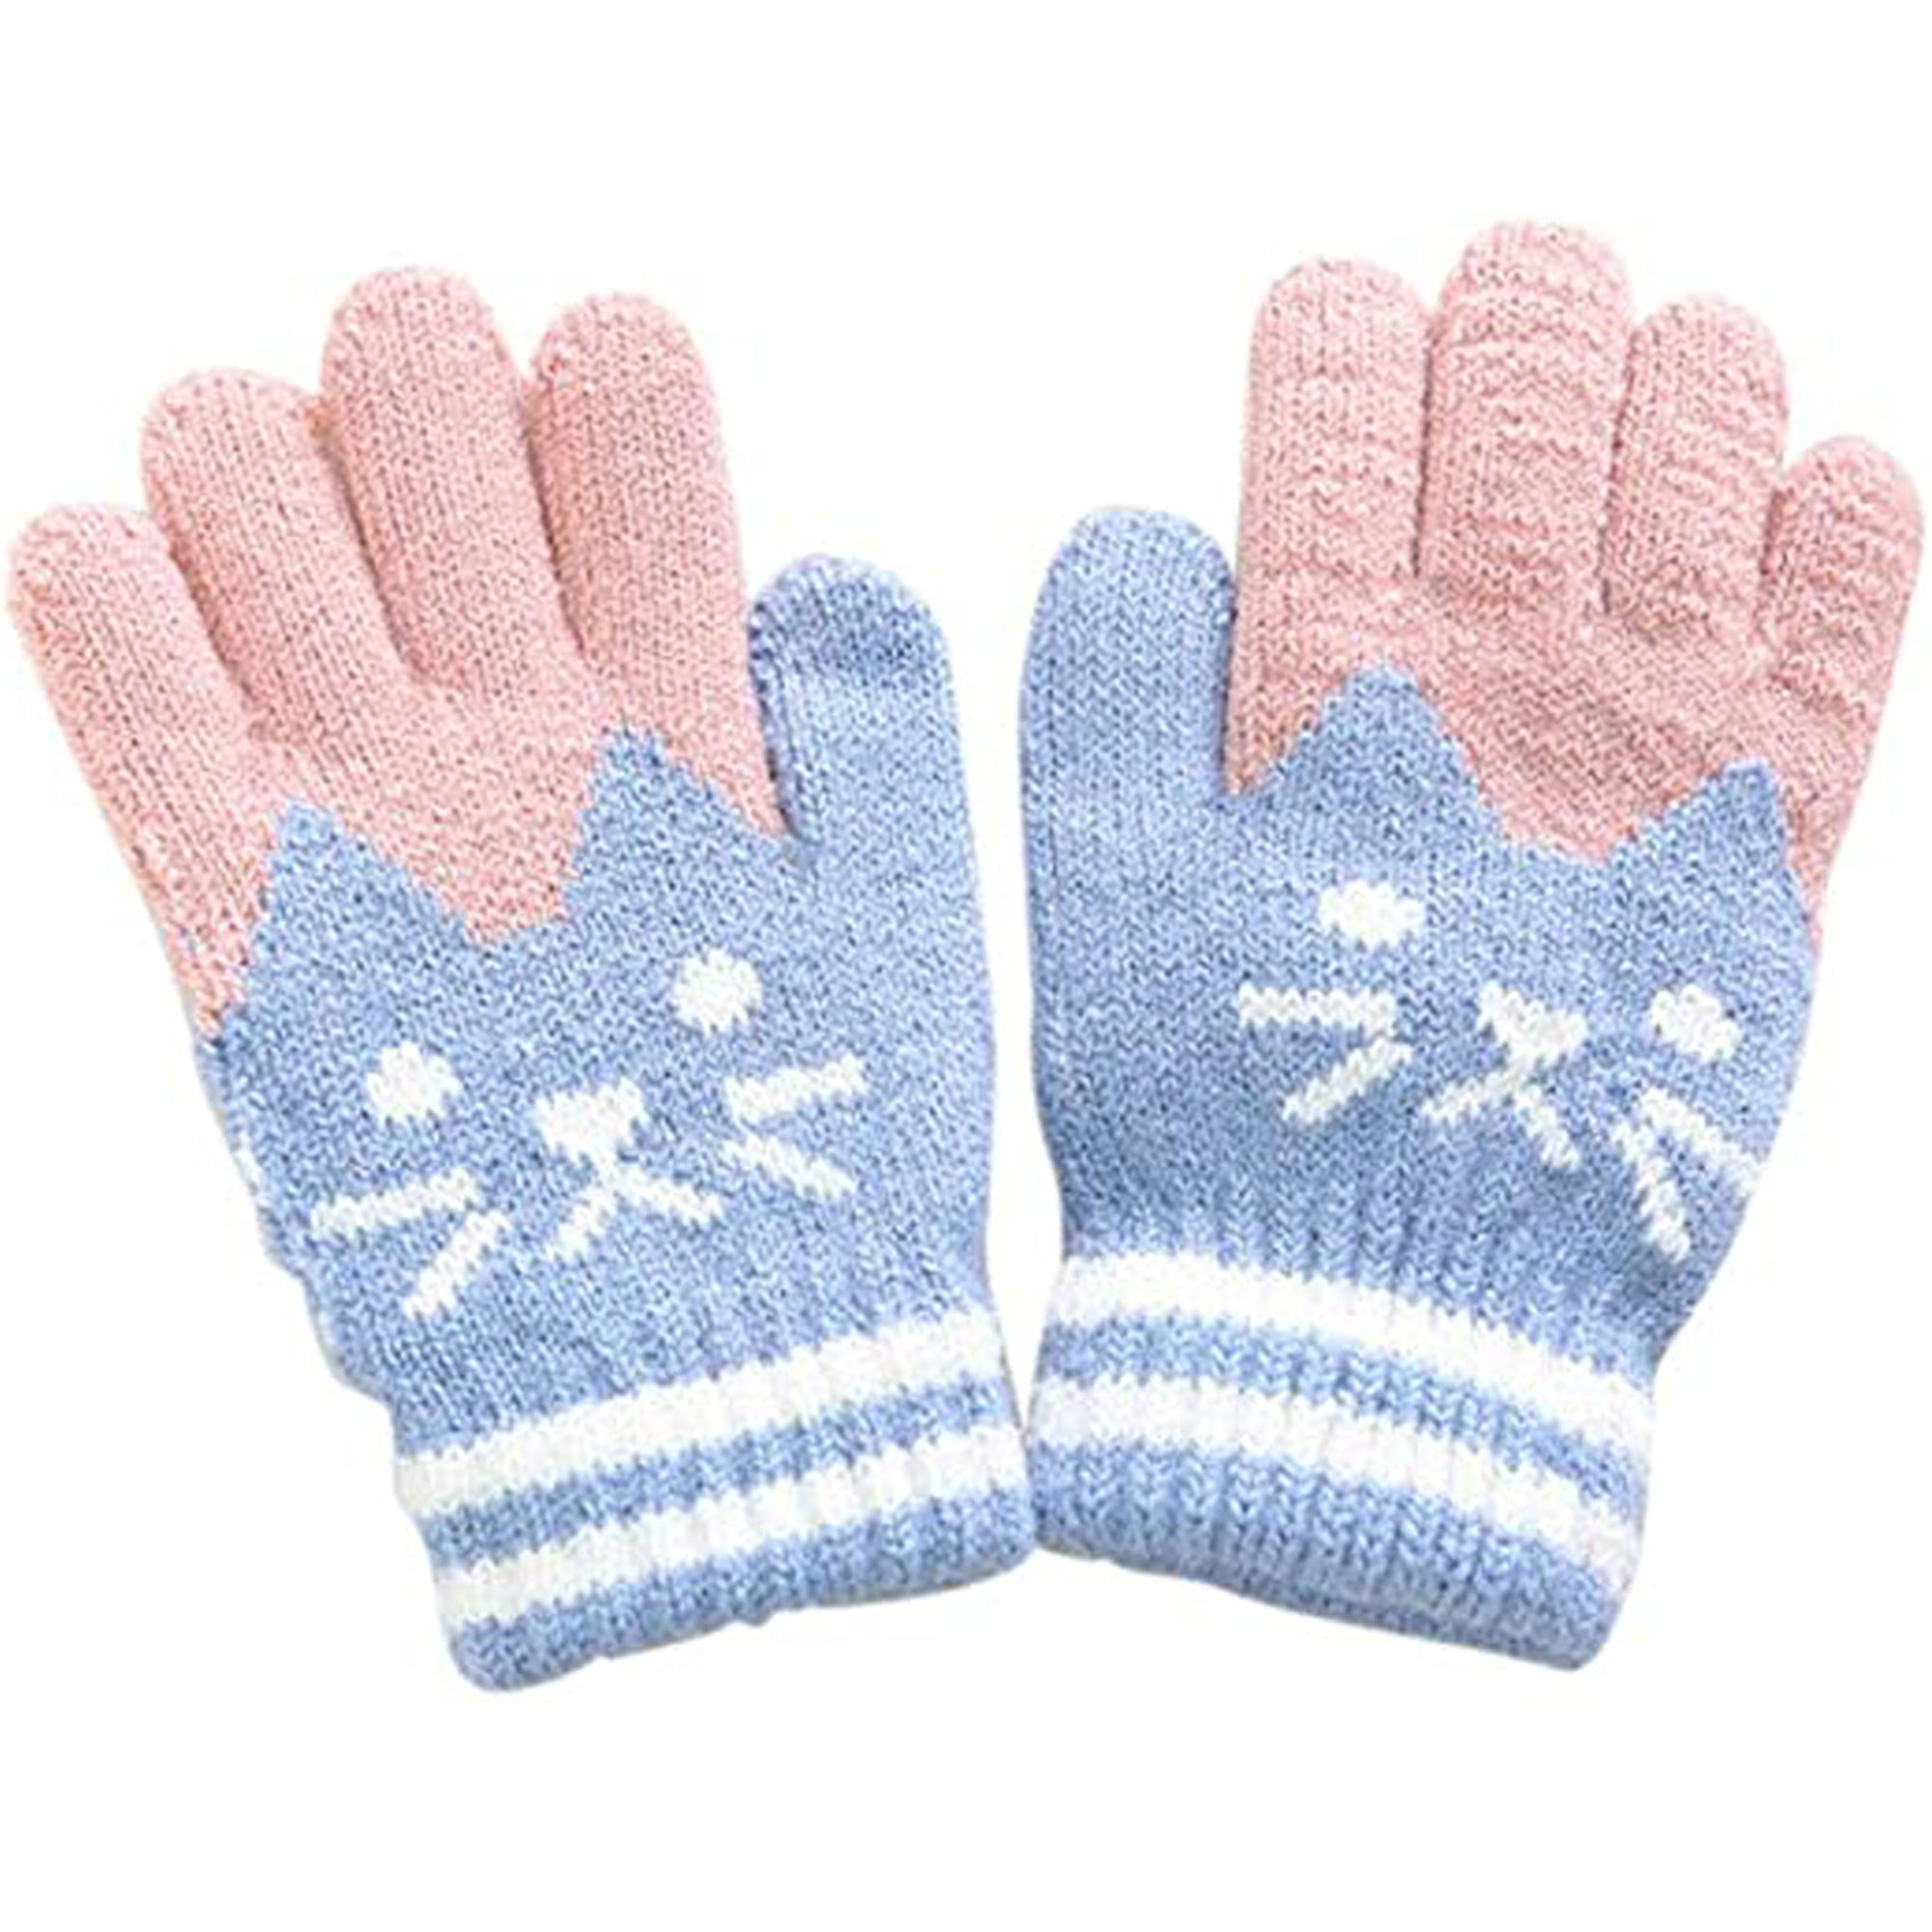 Cartoon Cat Gloves Thick Knitting Mittens for Boys Girls 0-3 Years Old New Hot 